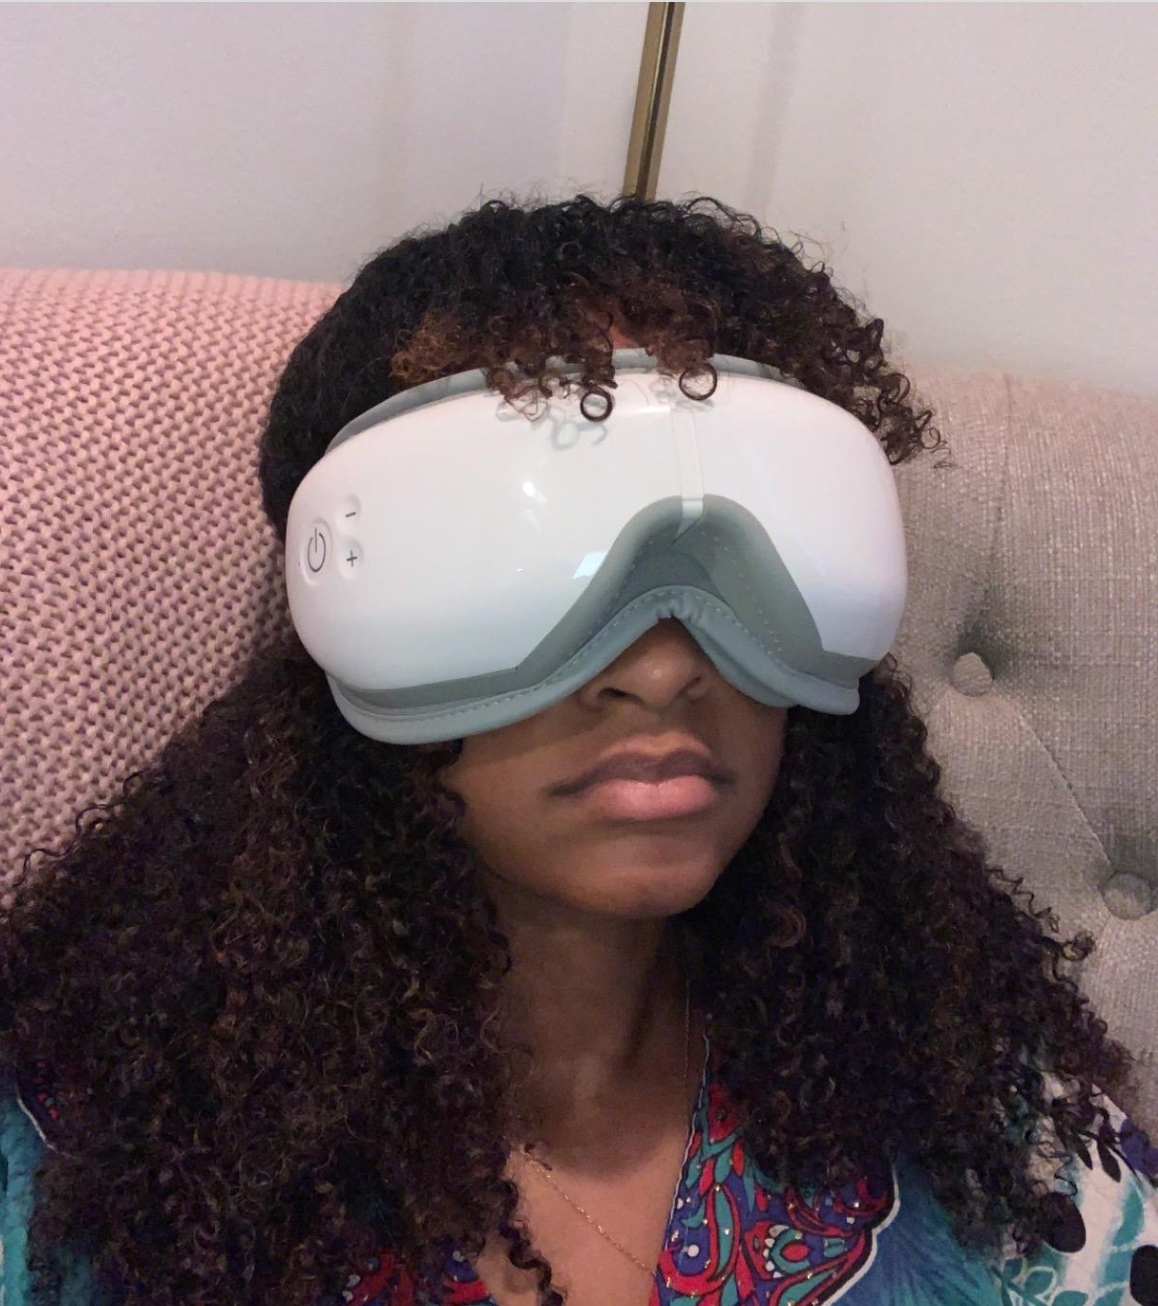 Reviewer wearing white eye massager with gray cushioning at the nose strapped around their head 